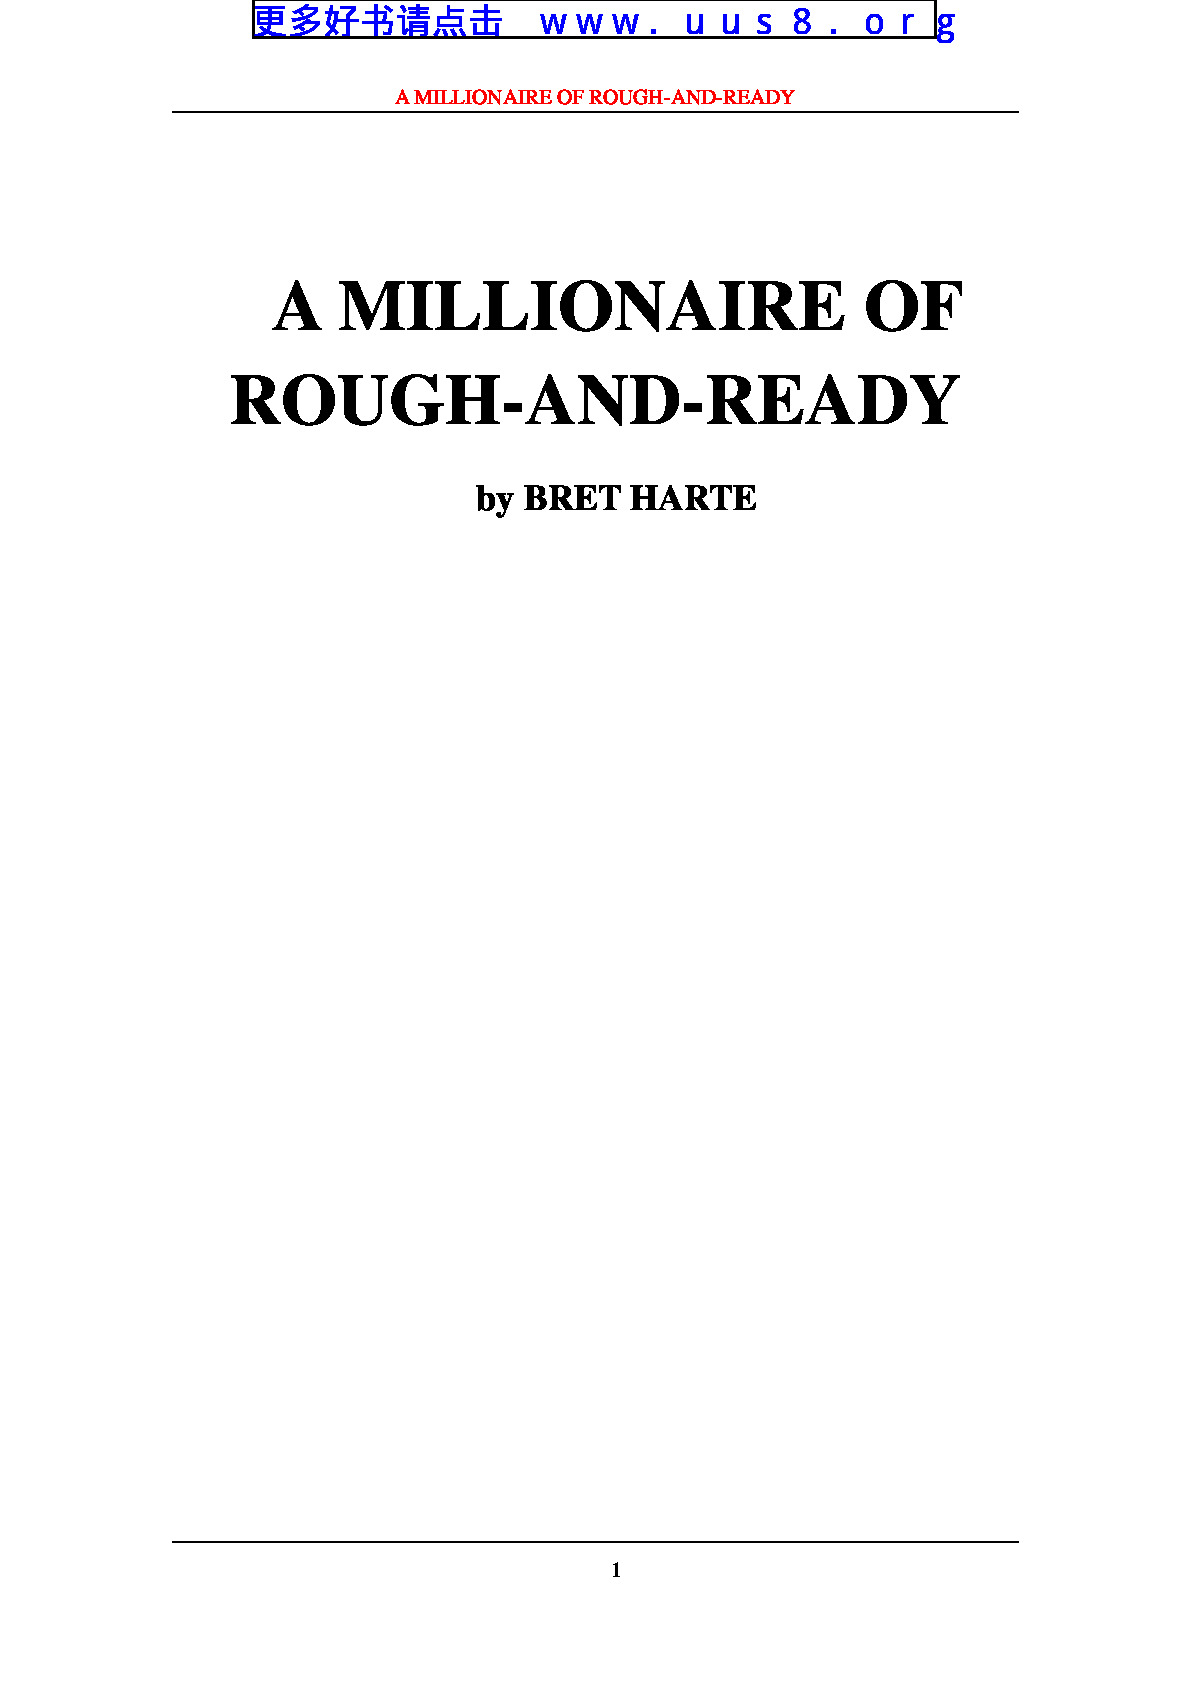 a_millionaire_of_rough-and-ready(粗犷的百万富翁)